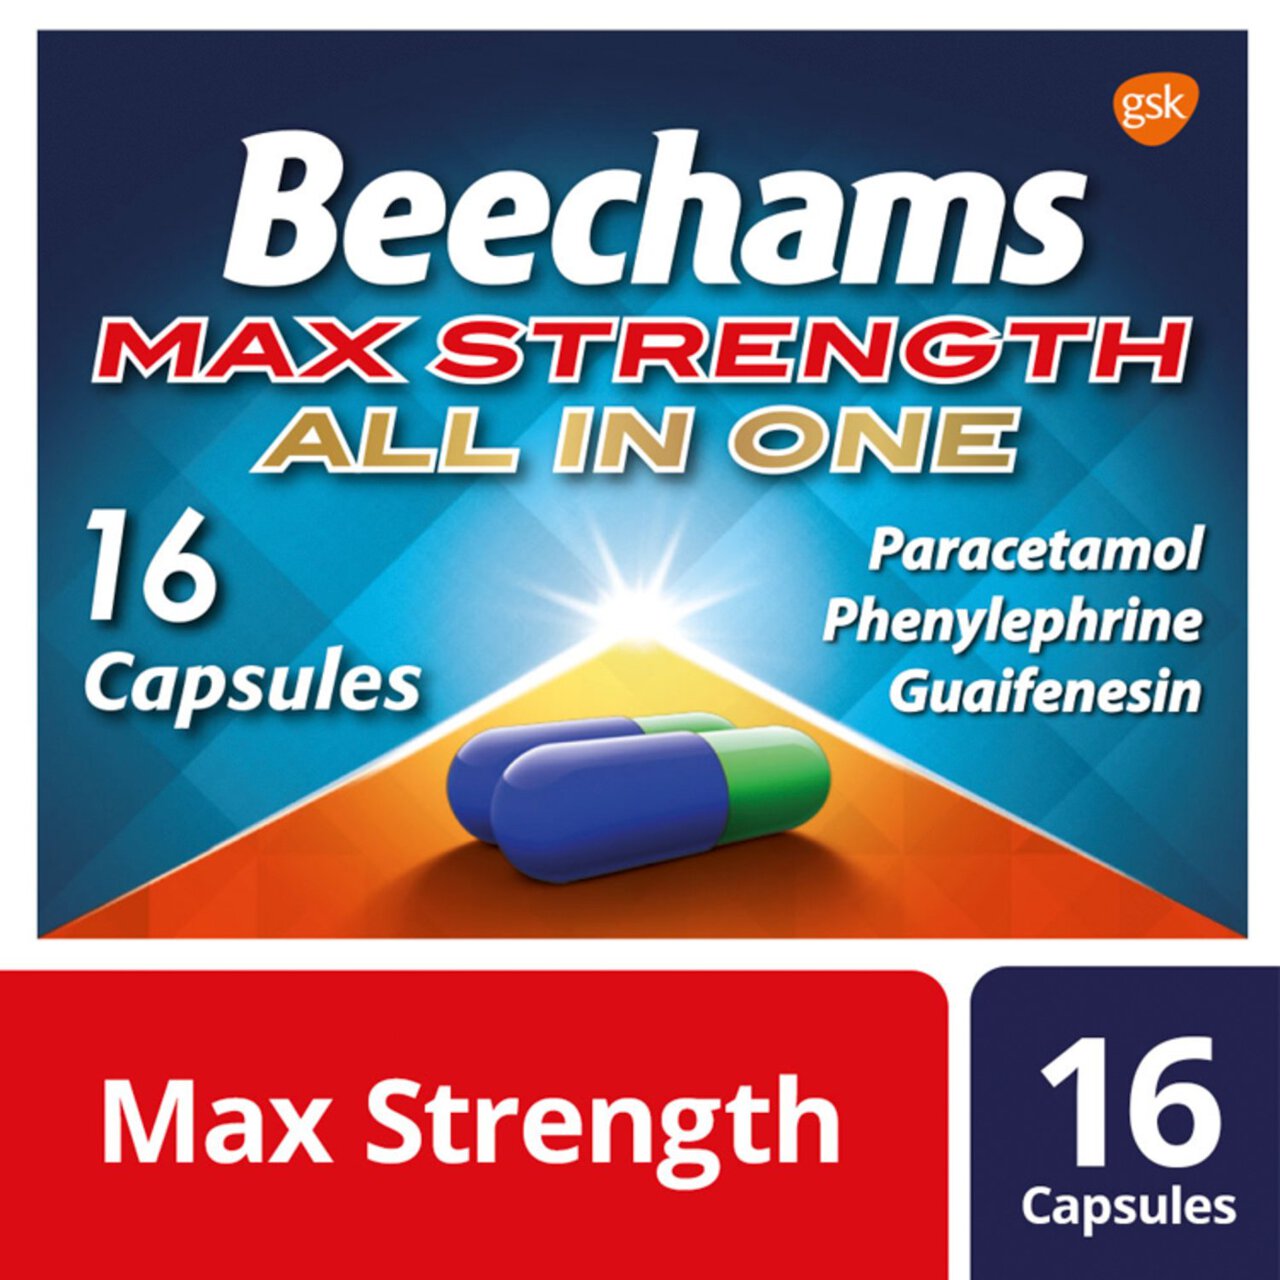 Beechams Max Strength All in One Cold & Flu Capsules 16 per pack